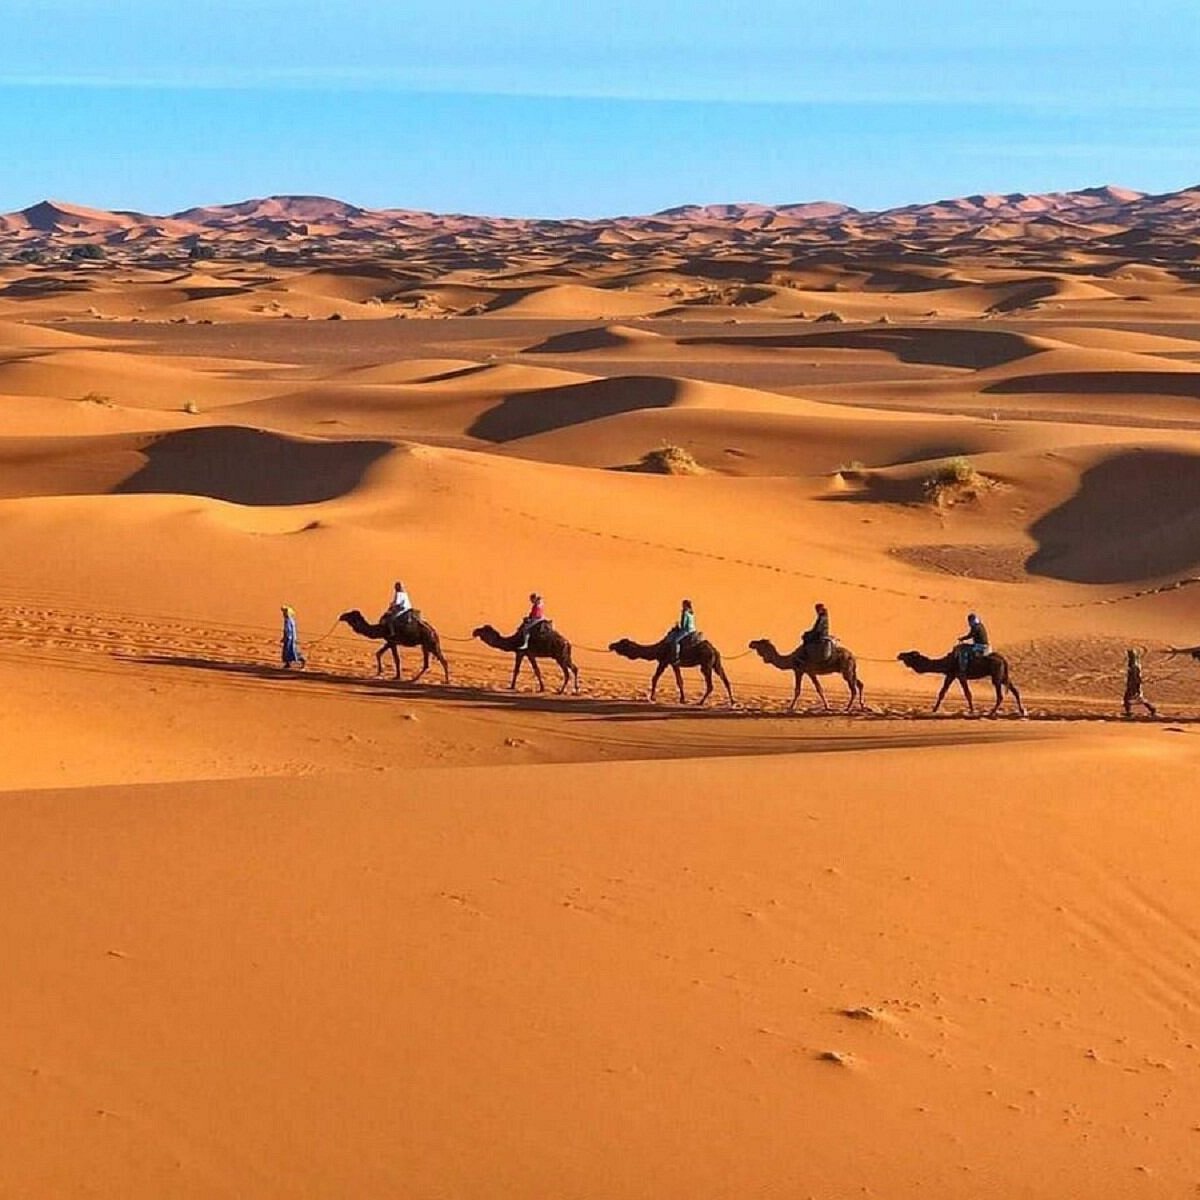 Cocastravel Morocco (Fes) - All You Need to Know BEFORE You Go